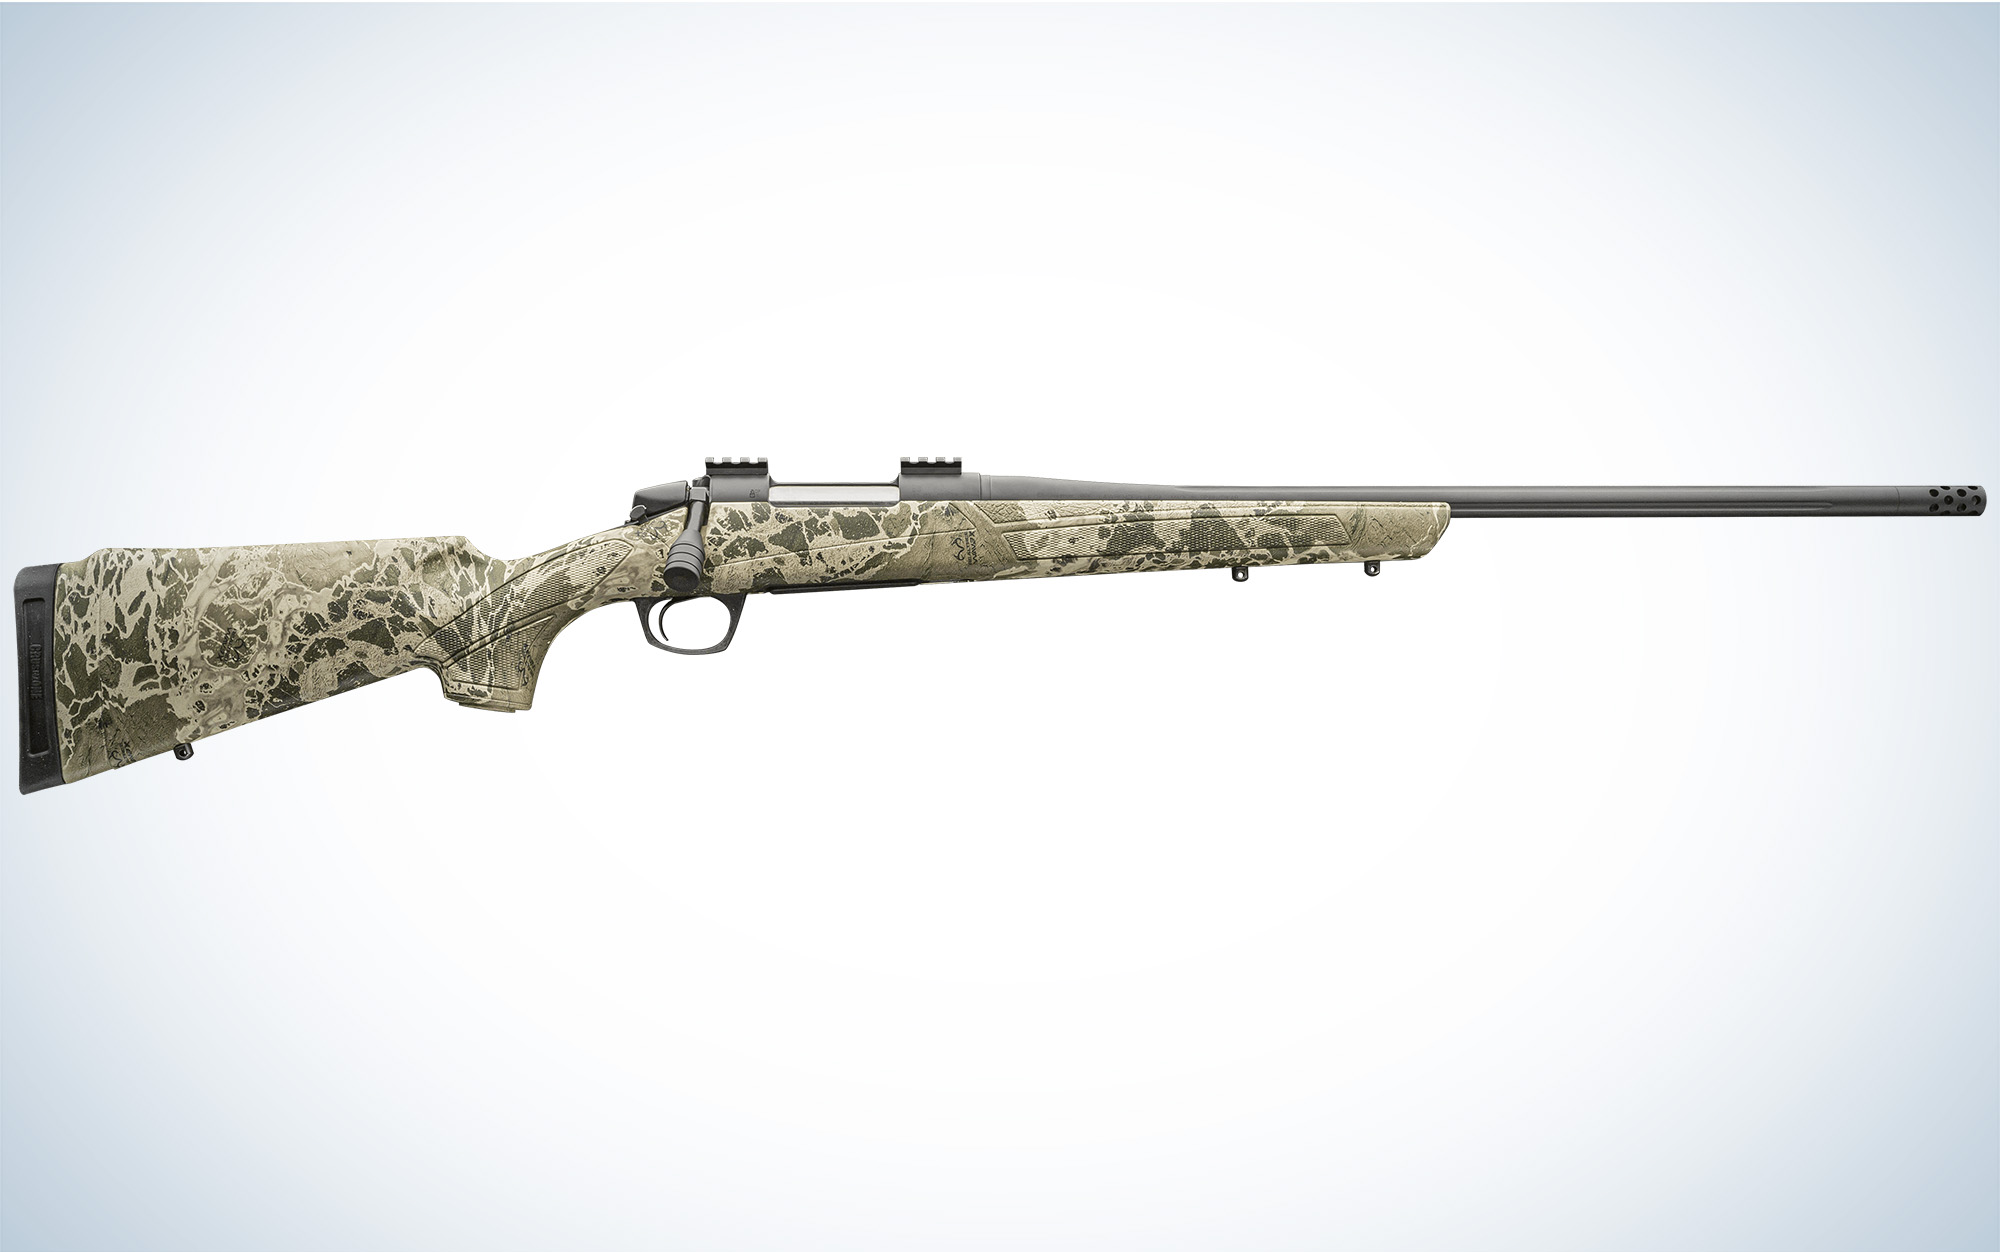 The CVA Cascade X-Treme is one of the new rifles of SHOT Show 2023.